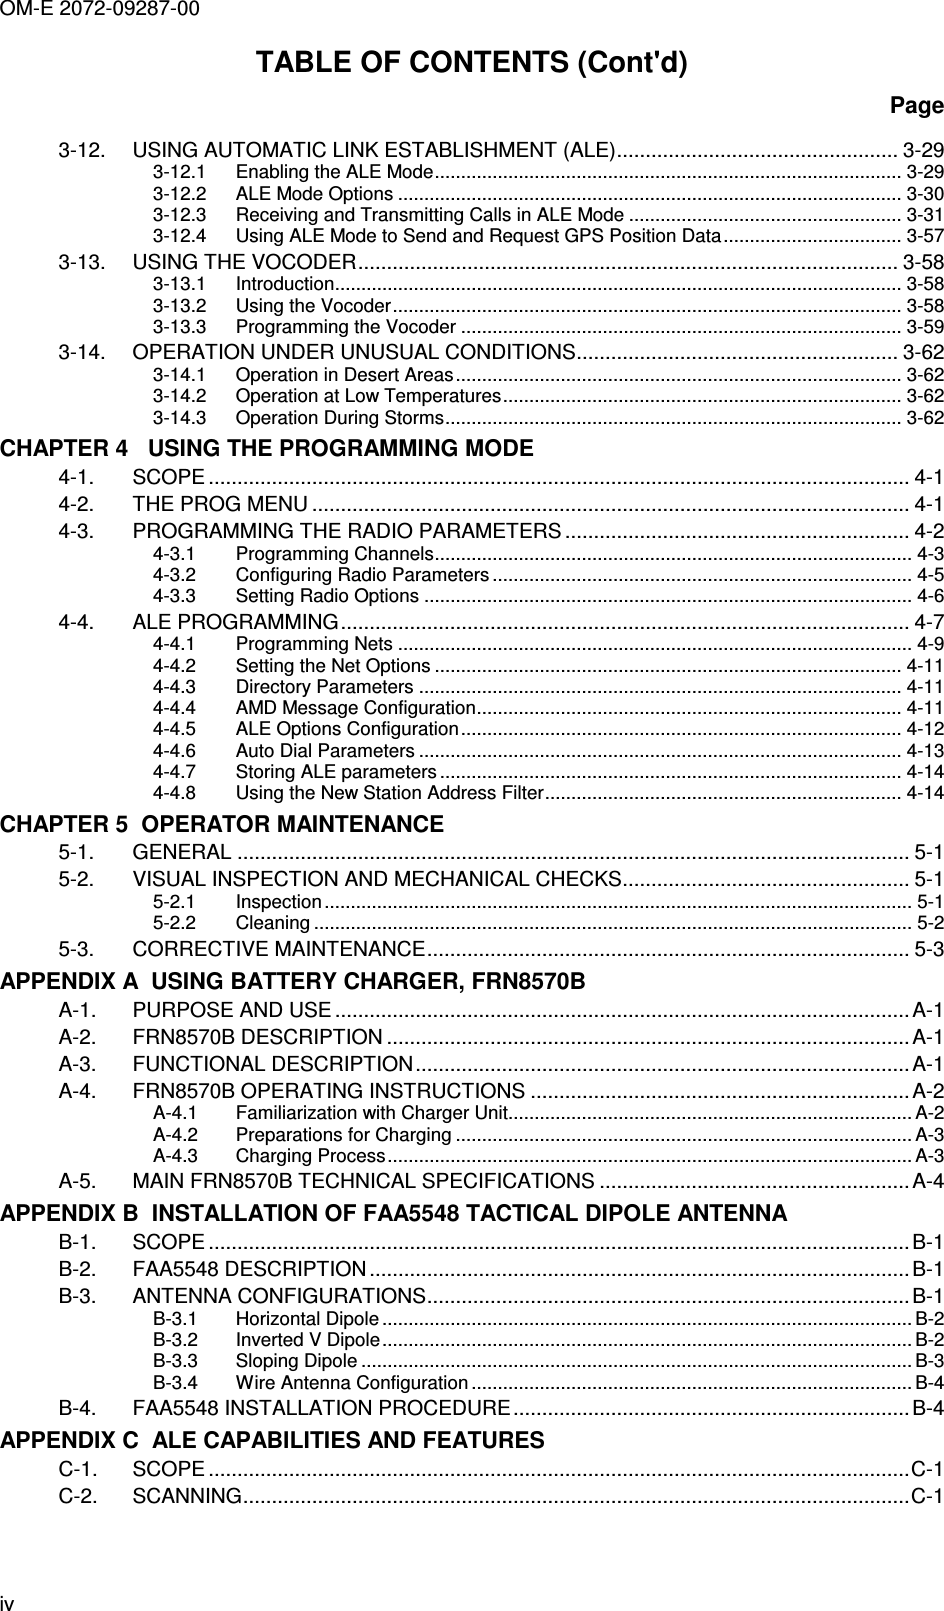 OM-E 2072-09287-00 iv TABLE OF CONTENTS (Cont&apos;d) Page 3-12. USING AUTOMATIC LINK ESTABLISHMENT (ALE)................................................. 3-29 3-12.1 Enabling the ALE Mode......................................................................................... 3-29 3-12.2 ALE Mode Options ................................................................................................ 3-30 3-12.3 Receiving and Transmitting Calls in ALE Mode .................................................... 3-31 3-12.4 Using ALE Mode to Send and Request GPS Position Data.................................. 3-57 3-13. USING THE VOCODER.............................................................................................. 3-58 3-13.1 Introduction............................................................................................................ 3-58 3-13.2 Using the Vocoder................................................................................................. 3-58 3-13.3 Programming the Vocoder .................................................................................... 3-59 3-14. OPERATION UNDER UNUSUAL CONDITIONS........................................................ 3-62 3-14.1 Operation in Desert Areas..................................................................................... 3-62 3-14.2 Operation at Low Temperatures............................................................................ 3-62 3-14.3 Operation During Storms....................................................................................... 3-62 CHAPTER 4   USING THE PROGRAMMING MODE 4-1. SCOPE .......................................................................................................................... 4-1 4-2. THE PROG MENU ........................................................................................................ 4-1 4-3. PROGRAMMING THE RADIO PARAMETERS ............................................................ 4-2 4-3.1 Programming Channels........................................................................................... 4-3 4-3.2 Configuring Radio Parameters ................................................................................ 4-5 4-3.3 Setting Radio Options ............................................................................................. 4-6 4-4. ALE PROGRAMMING................................................................................................... 4-7 4-4.1 Programming Nets .................................................................................................. 4-9 4-4.2 Setting the Net Options ......................................................................................... 4-11 4-4.3 Directory Parameters ............................................................................................ 4-11 4-4.4 AMD Message Configuration................................................................................. 4-11 4-4.5 ALE Options Configuration.................................................................................... 4-12 4-4.6 Auto Dial Parameters ............................................................................................ 4-13 4-4.7 Storing ALE parameters ........................................................................................ 4-14 4-4.8 Using the New Station Address Filter.................................................................... 4-14 CHAPTER 5  OPERATOR MAINTENANCE 5-1. GENERAL ..................................................................................................................... 5-1 5-2. VISUAL INSPECTION AND MECHANICAL CHECKS.................................................. 5-1 5-2.1 Inspection ................................................................................................................ 5-1 5-2.2 Cleaning .................................................................................................................. 5-2 5-3. CORRECTIVE MAINTENANCE.................................................................................... 5-3 APPENDIX A  USING BATTERY CHARGER, FRN8570B A-1. PURPOSE AND USE ....................................................................................................A-1 A-2. FRN8570B DESCRIPTION ...........................................................................................A-1 A-3. FUNCTIONAL DESCRIPTION......................................................................................A-1 A-4. FRN8570B OPERATING INSTRUCTIONS ..................................................................A-2 A-4.1 Familiarization with Charger Unit............................................................................. A-2 A-4.2 Preparations for Charging ....................................................................................... A-3 A-4.3 Charging Process.................................................................................................... A-3 A-5. MAIN FRN8570B TECHNICAL SPECIFICATIONS ......................................................A-4 APPENDIX B  INSTALLATION OF FAA5548 TACTICAL DIPOLE ANTENNA B-1. SCOPE .......................................................................................................................... B-1 B-2. FAA5548 DESCRIPTION ..............................................................................................B-1 B-3. ANTENNA CONFIGURATIONS....................................................................................B-1 B-3.1 Horizontal Dipole ..................................................................................................... B-2 B-3.2 Inverted V Dipole..................................................................................................... B-2 B-3.3 Sloping Dipole ......................................................................................................... B-3 B-3.4 Wire Antenna Configuration .................................................................................... B-4 B-4. FAA5548 INSTALLATION PROCEDURE.....................................................................B-4 APPENDIX C  ALE CAPABILITIES AND FEATURES C-1. SCOPE ..........................................................................................................................C-1 C-2. SCANNING....................................................................................................................C-1 